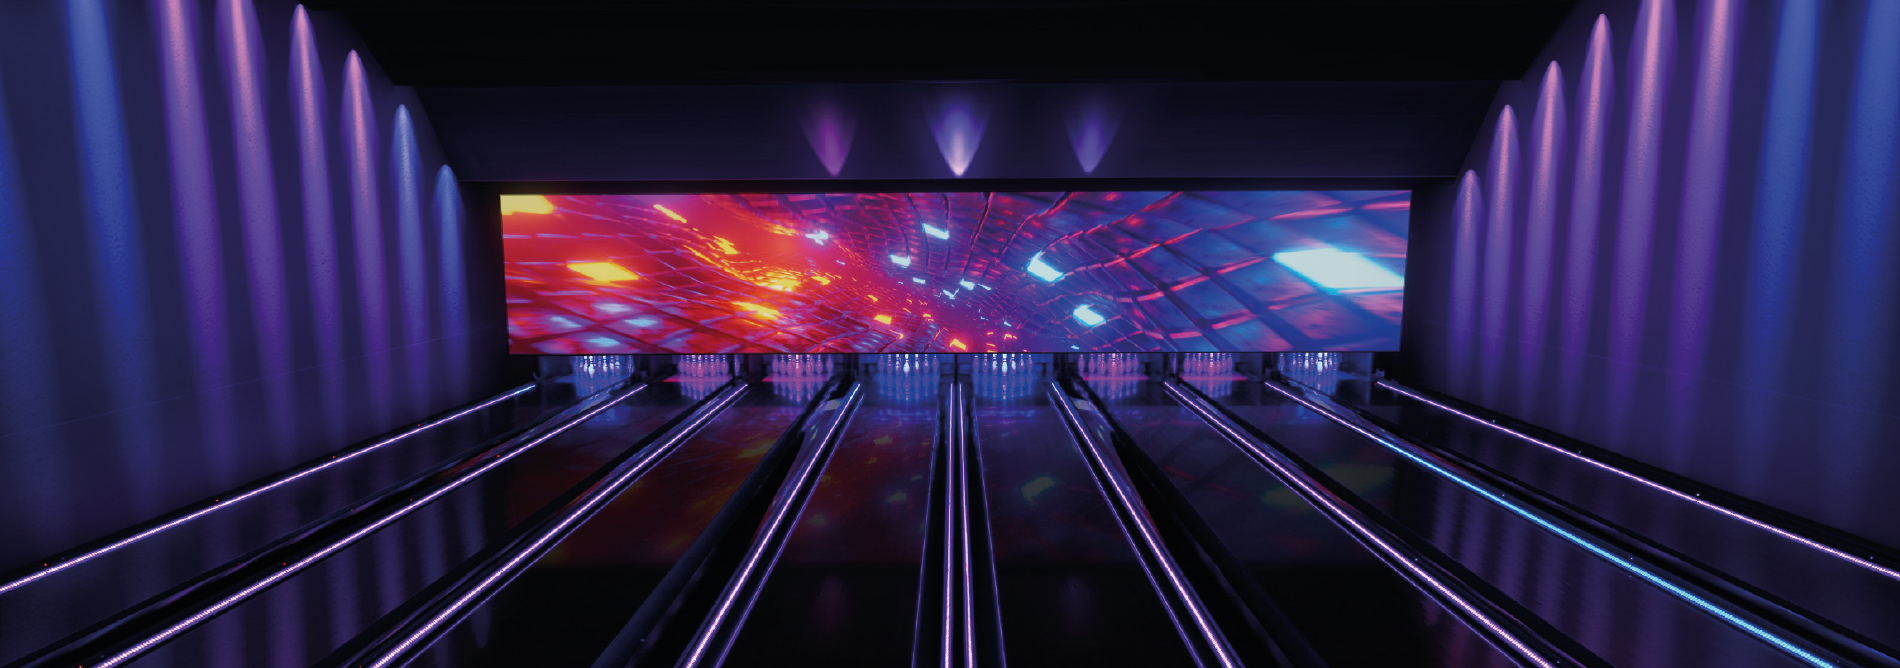 QubicaAMF France -Bowling-NEOVERSE-video LED -wall-banner.jpeg